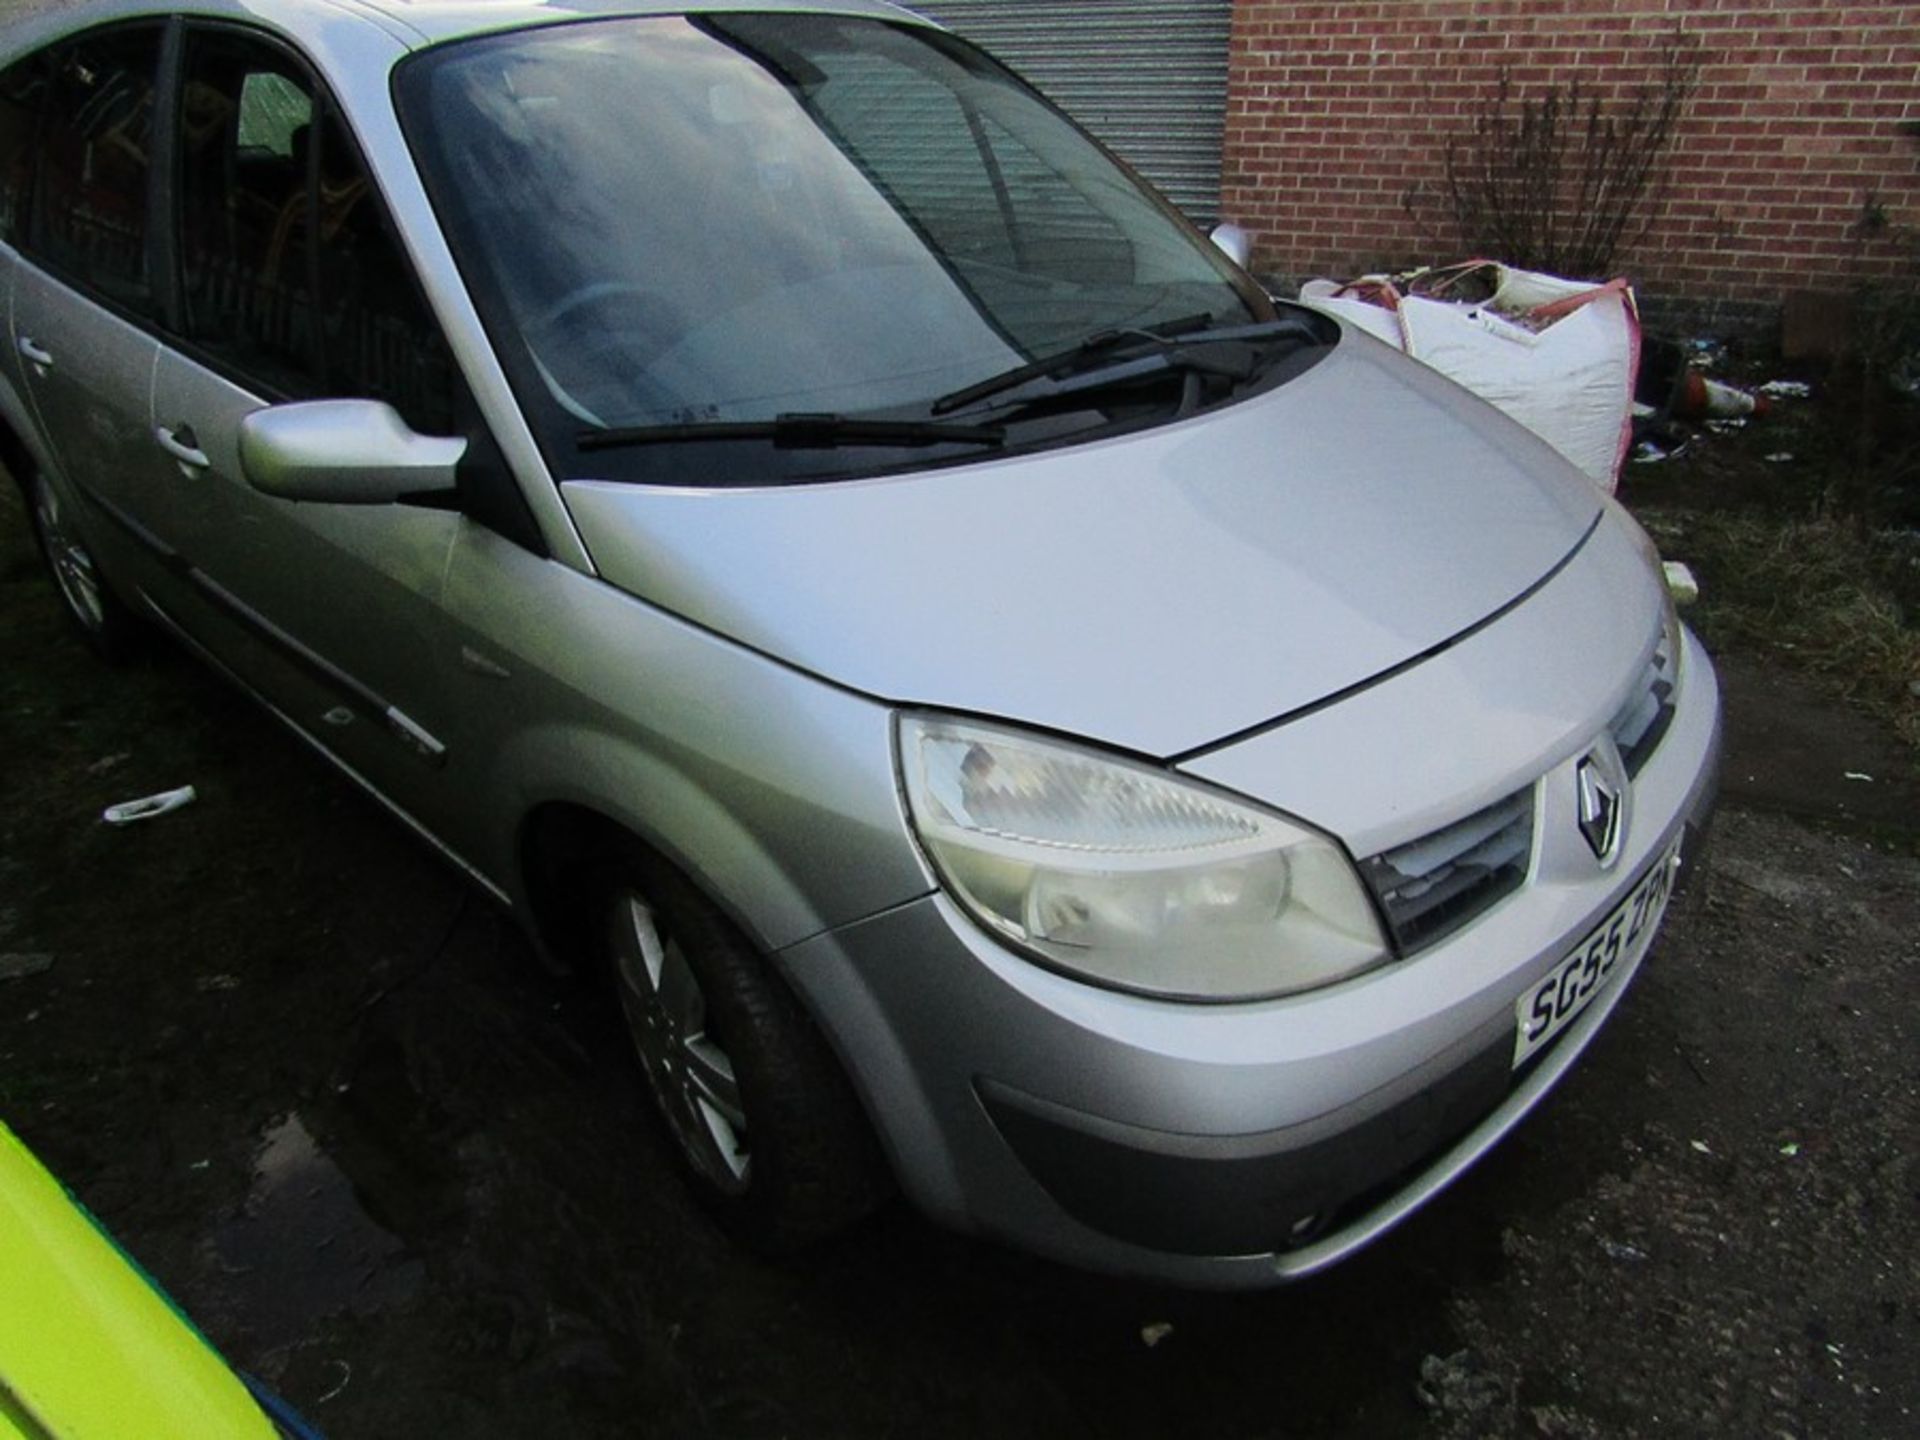 55 Plate Renault Grand Scenic Dyn-ique 16v 1.6i, MOT Expired October 2020, Mileage unknown as it - Image 11 of 19